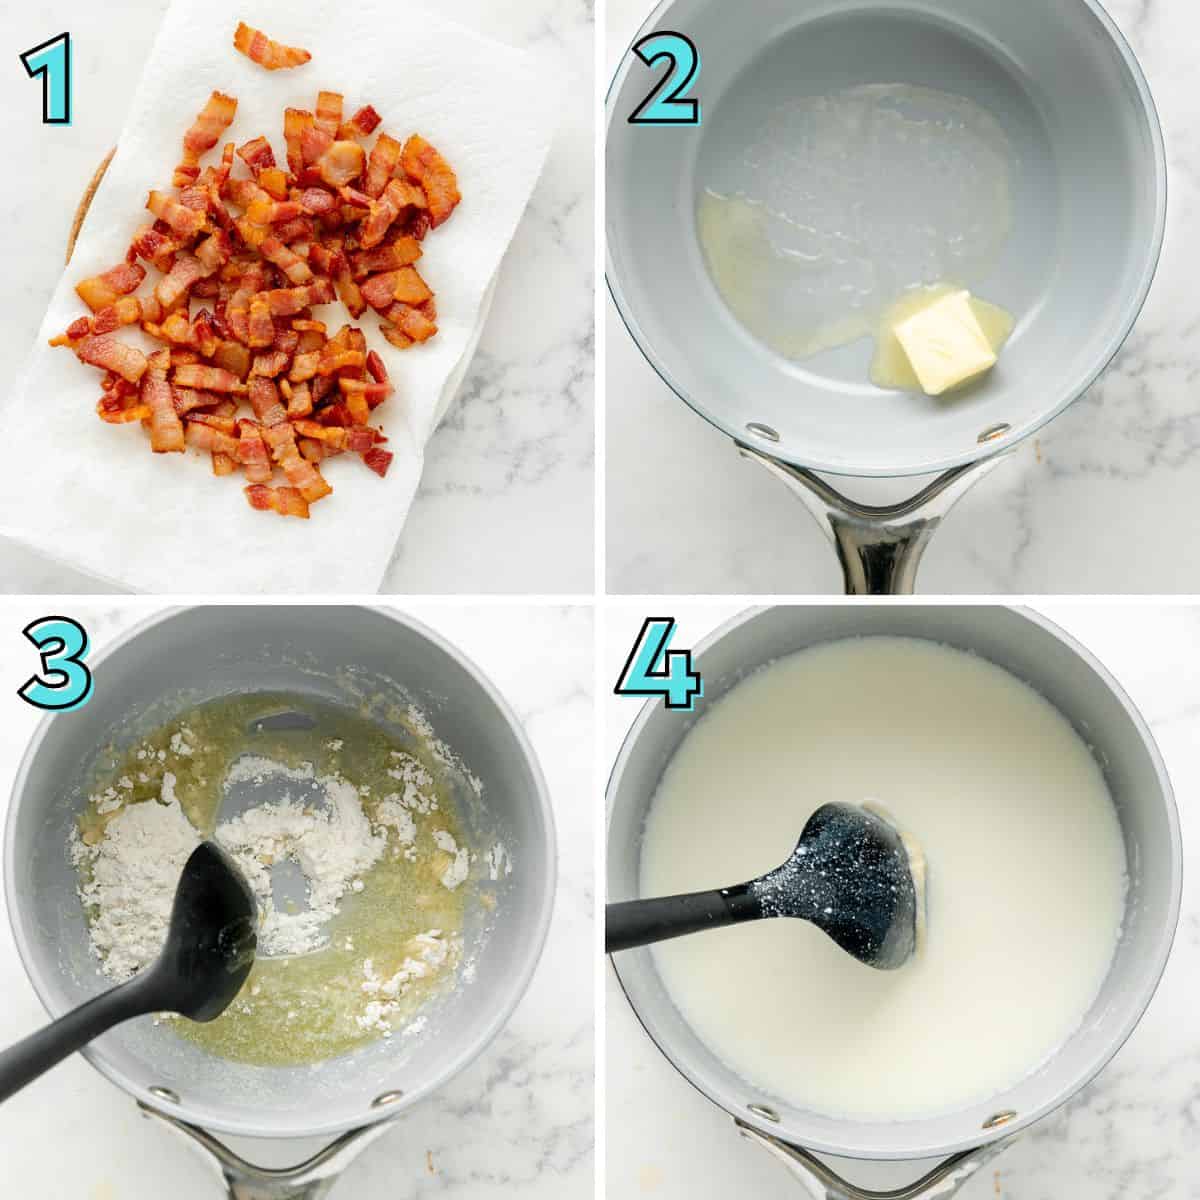 Step by step instructions to prepare longhorn mac and cheese, in a collage.